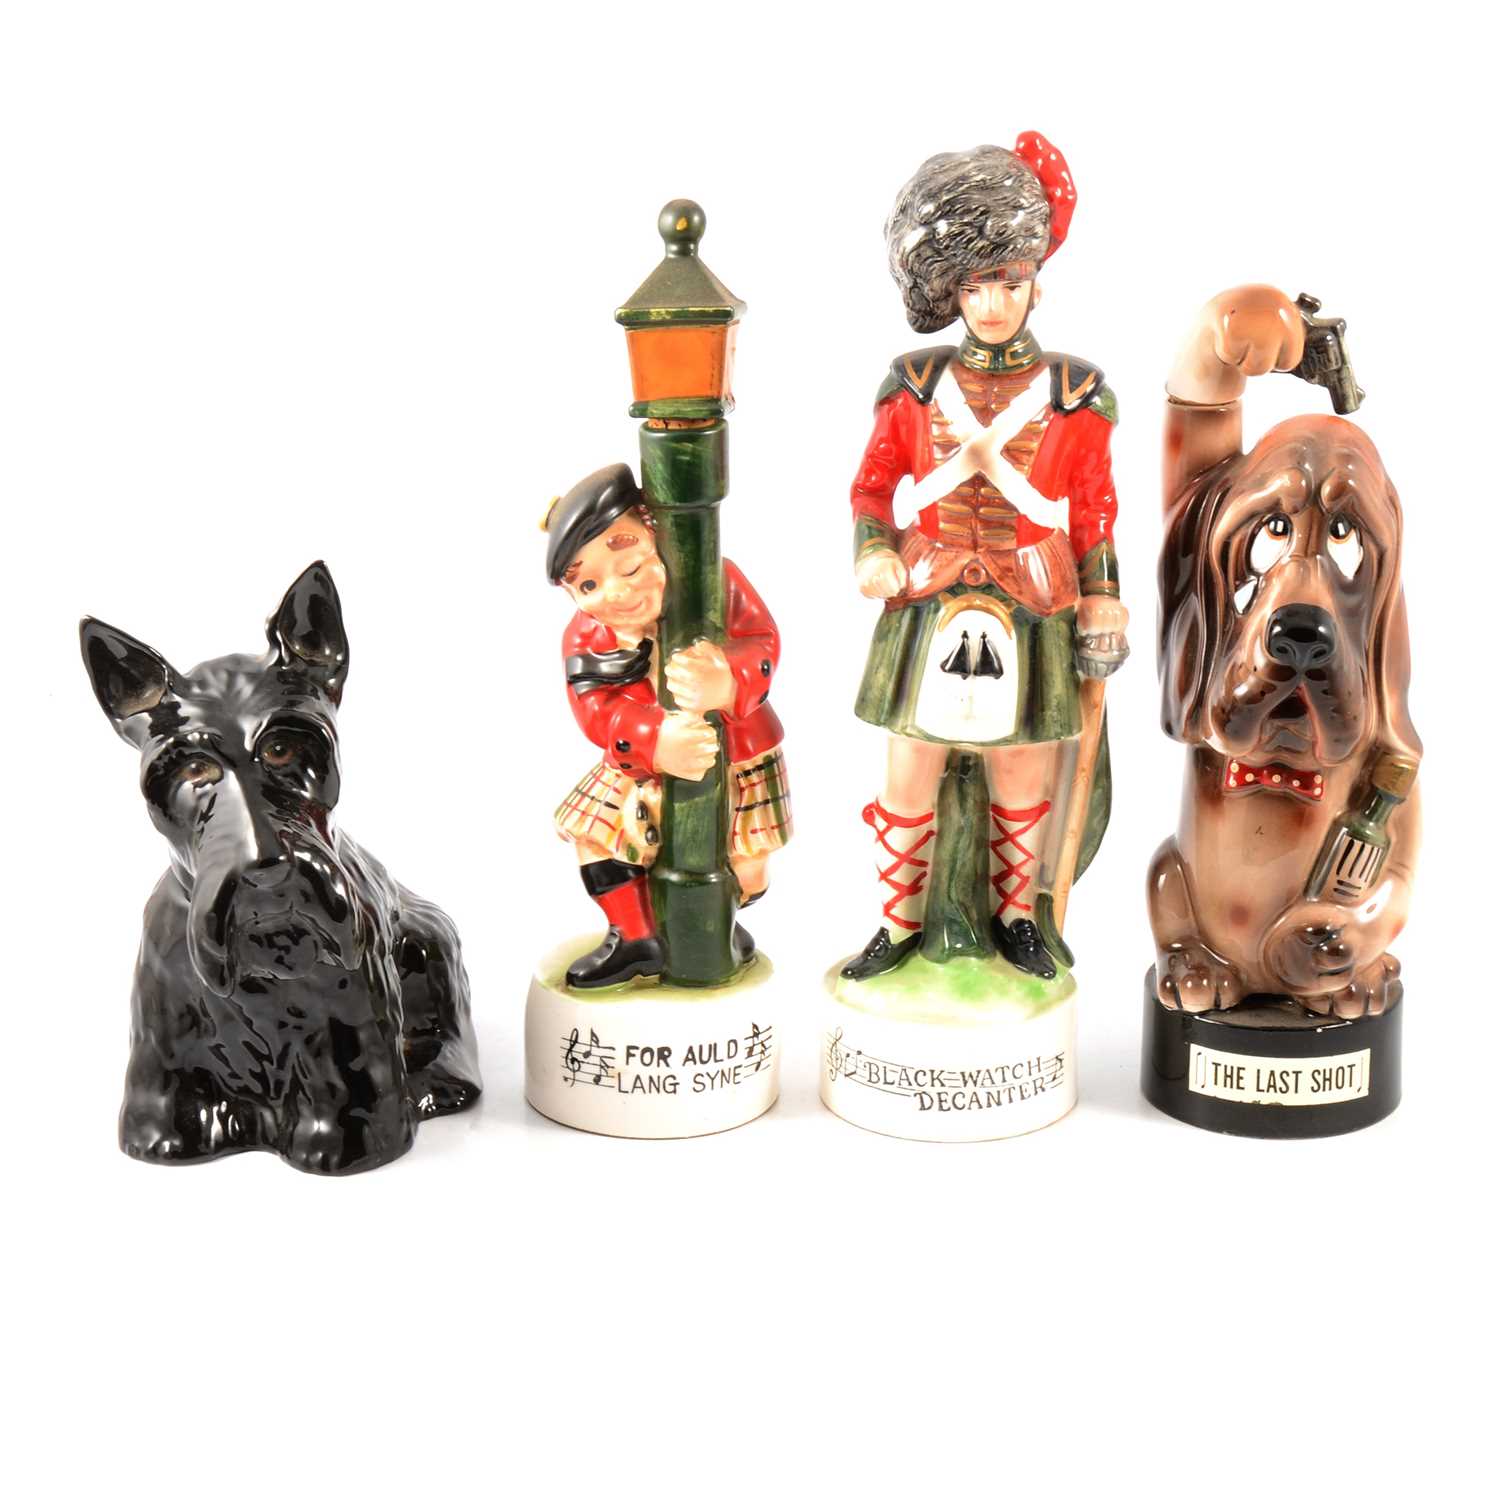 Collection of whisky ceramic flagons, decanters, and other branded items